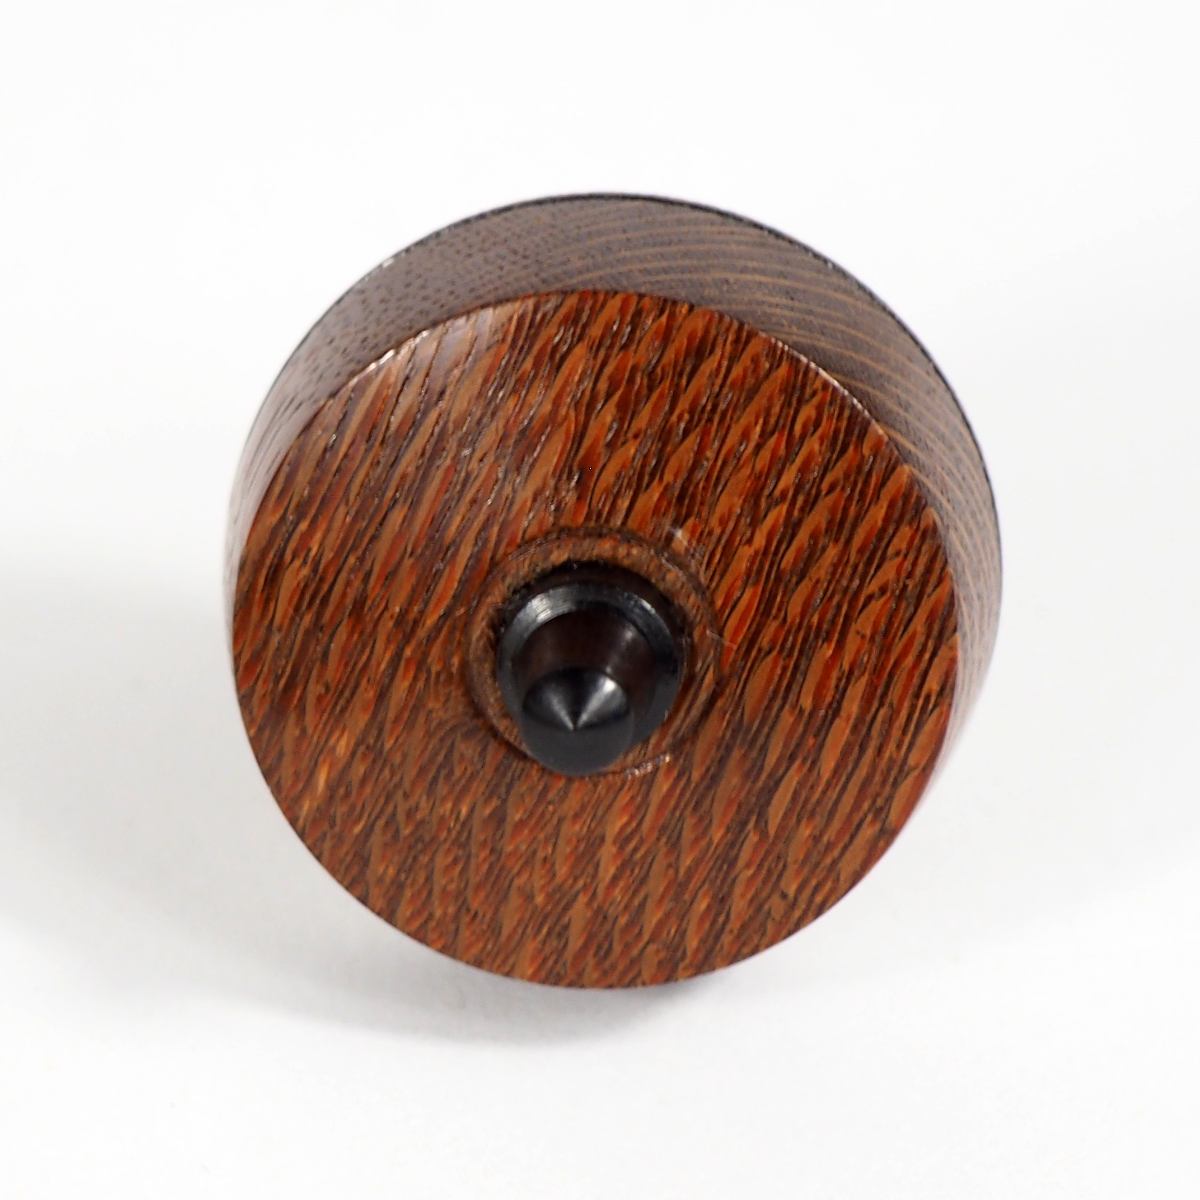 Artful Handmade Spinning Top made of Bead Wood with Brass Inlay